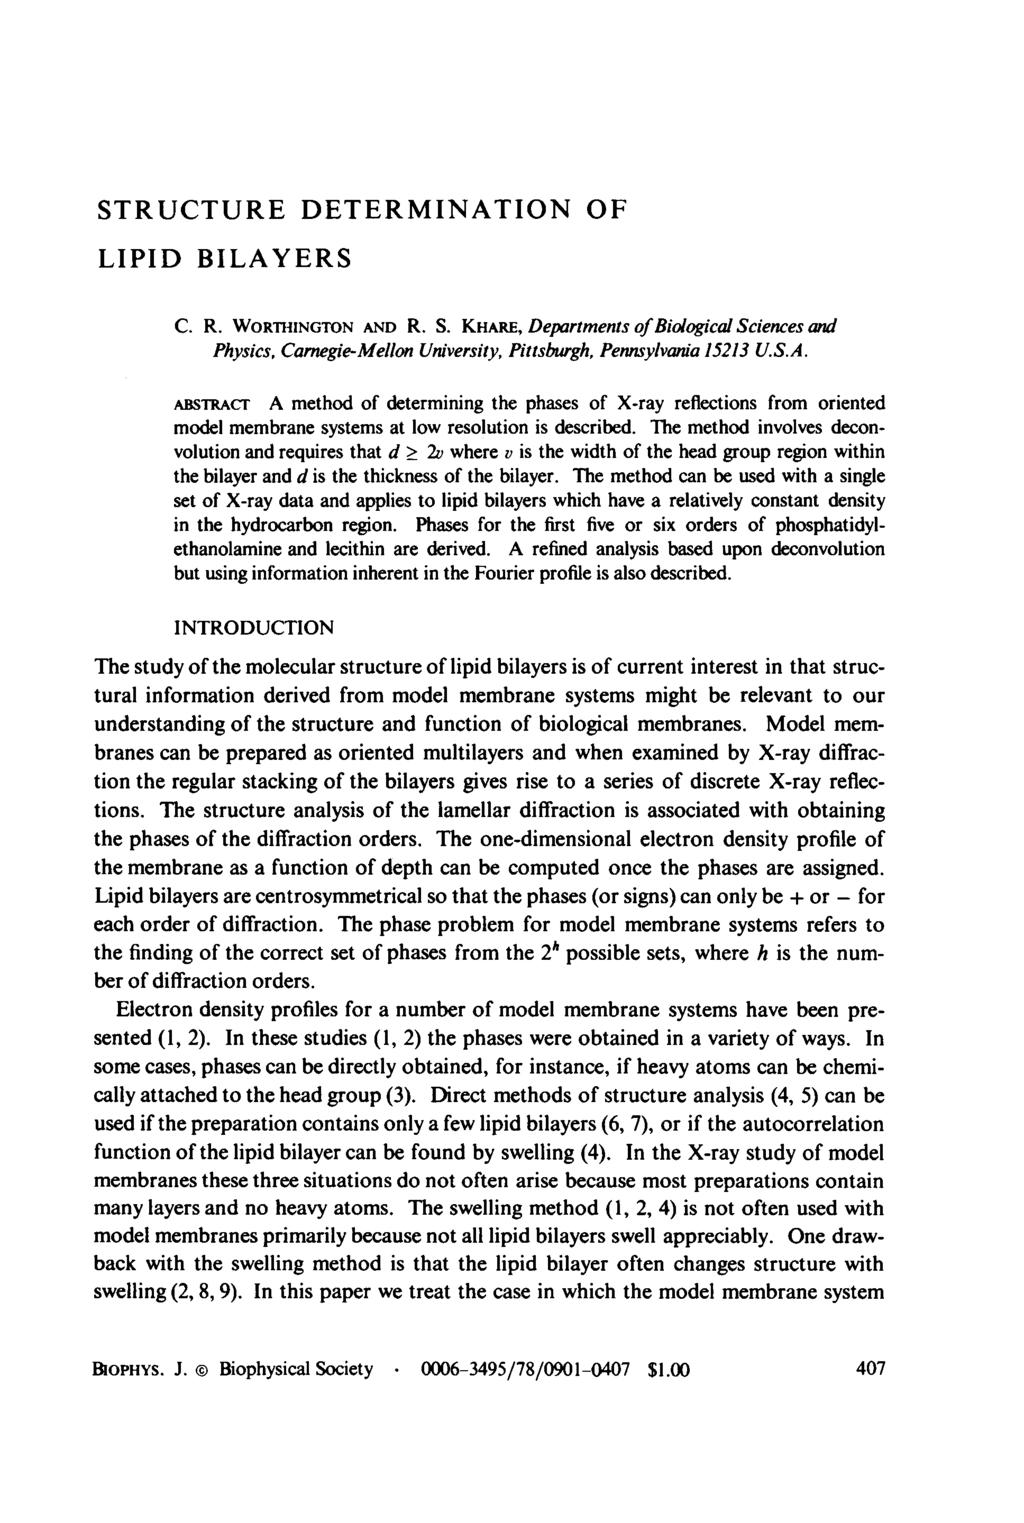 STRUCTURE DETERMINATION OF LIPID BILAYERS C. R. WORTHINGTON AND R. S. KHARE, Departments ofbiological Sciences and Physics, Carnegie-Mellon University, Pittsburgh, Pennsylvania 15213 U.S.A. AssTRAc-r A method of determining the phases of X-ray reflections from oriented model membrane systems at low resolution is described.